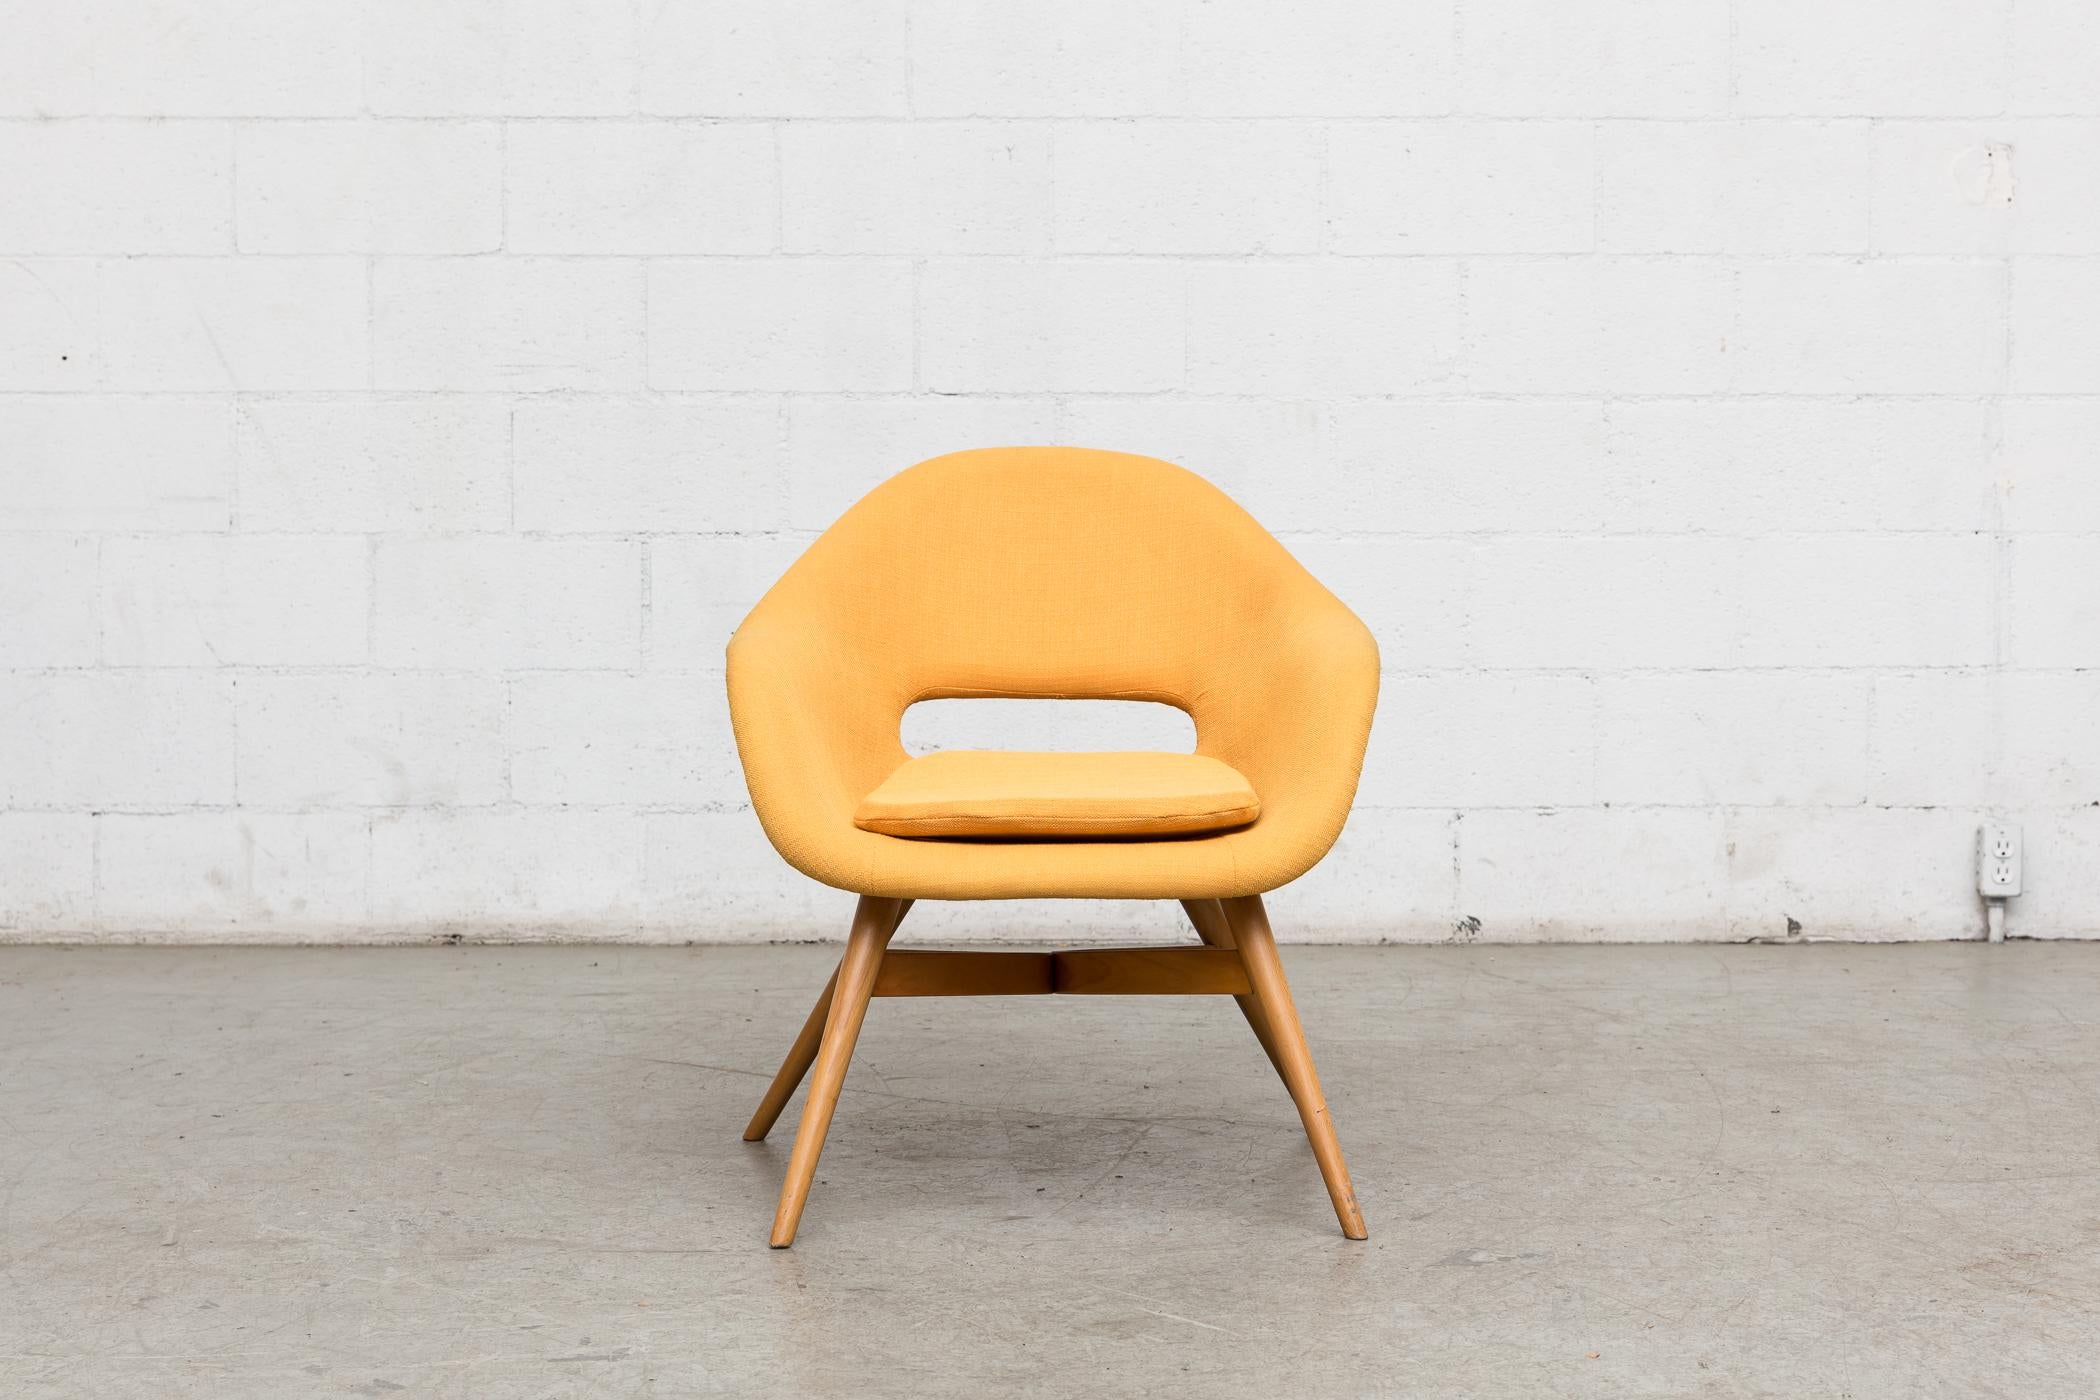 Saarinen Style Mid-Century Modern bucket chairs with oval cut-outs by Miroslav Navratil. Newly upholstered in sunshine yellow fabric. Original birch frame in good original condition. Others available in assorted colors.